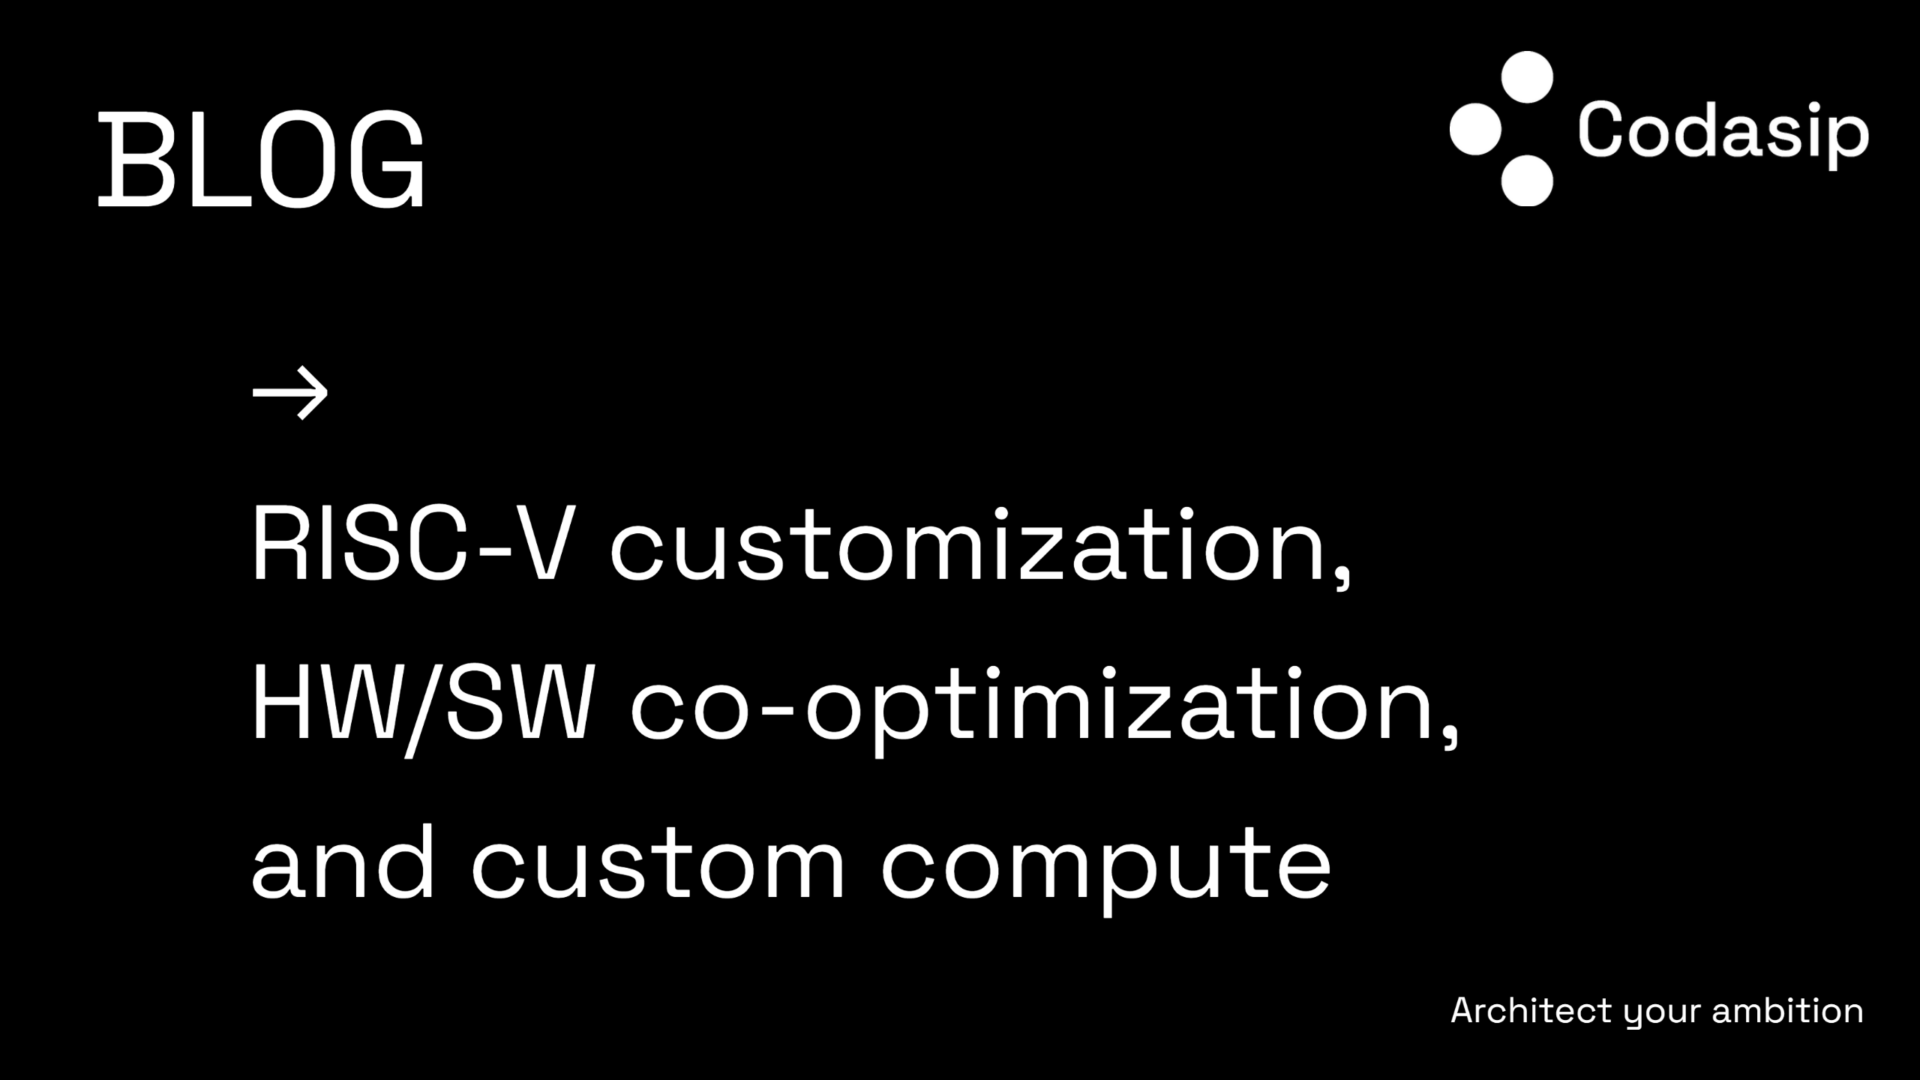 blog cover image for risc-v customization and custom compute